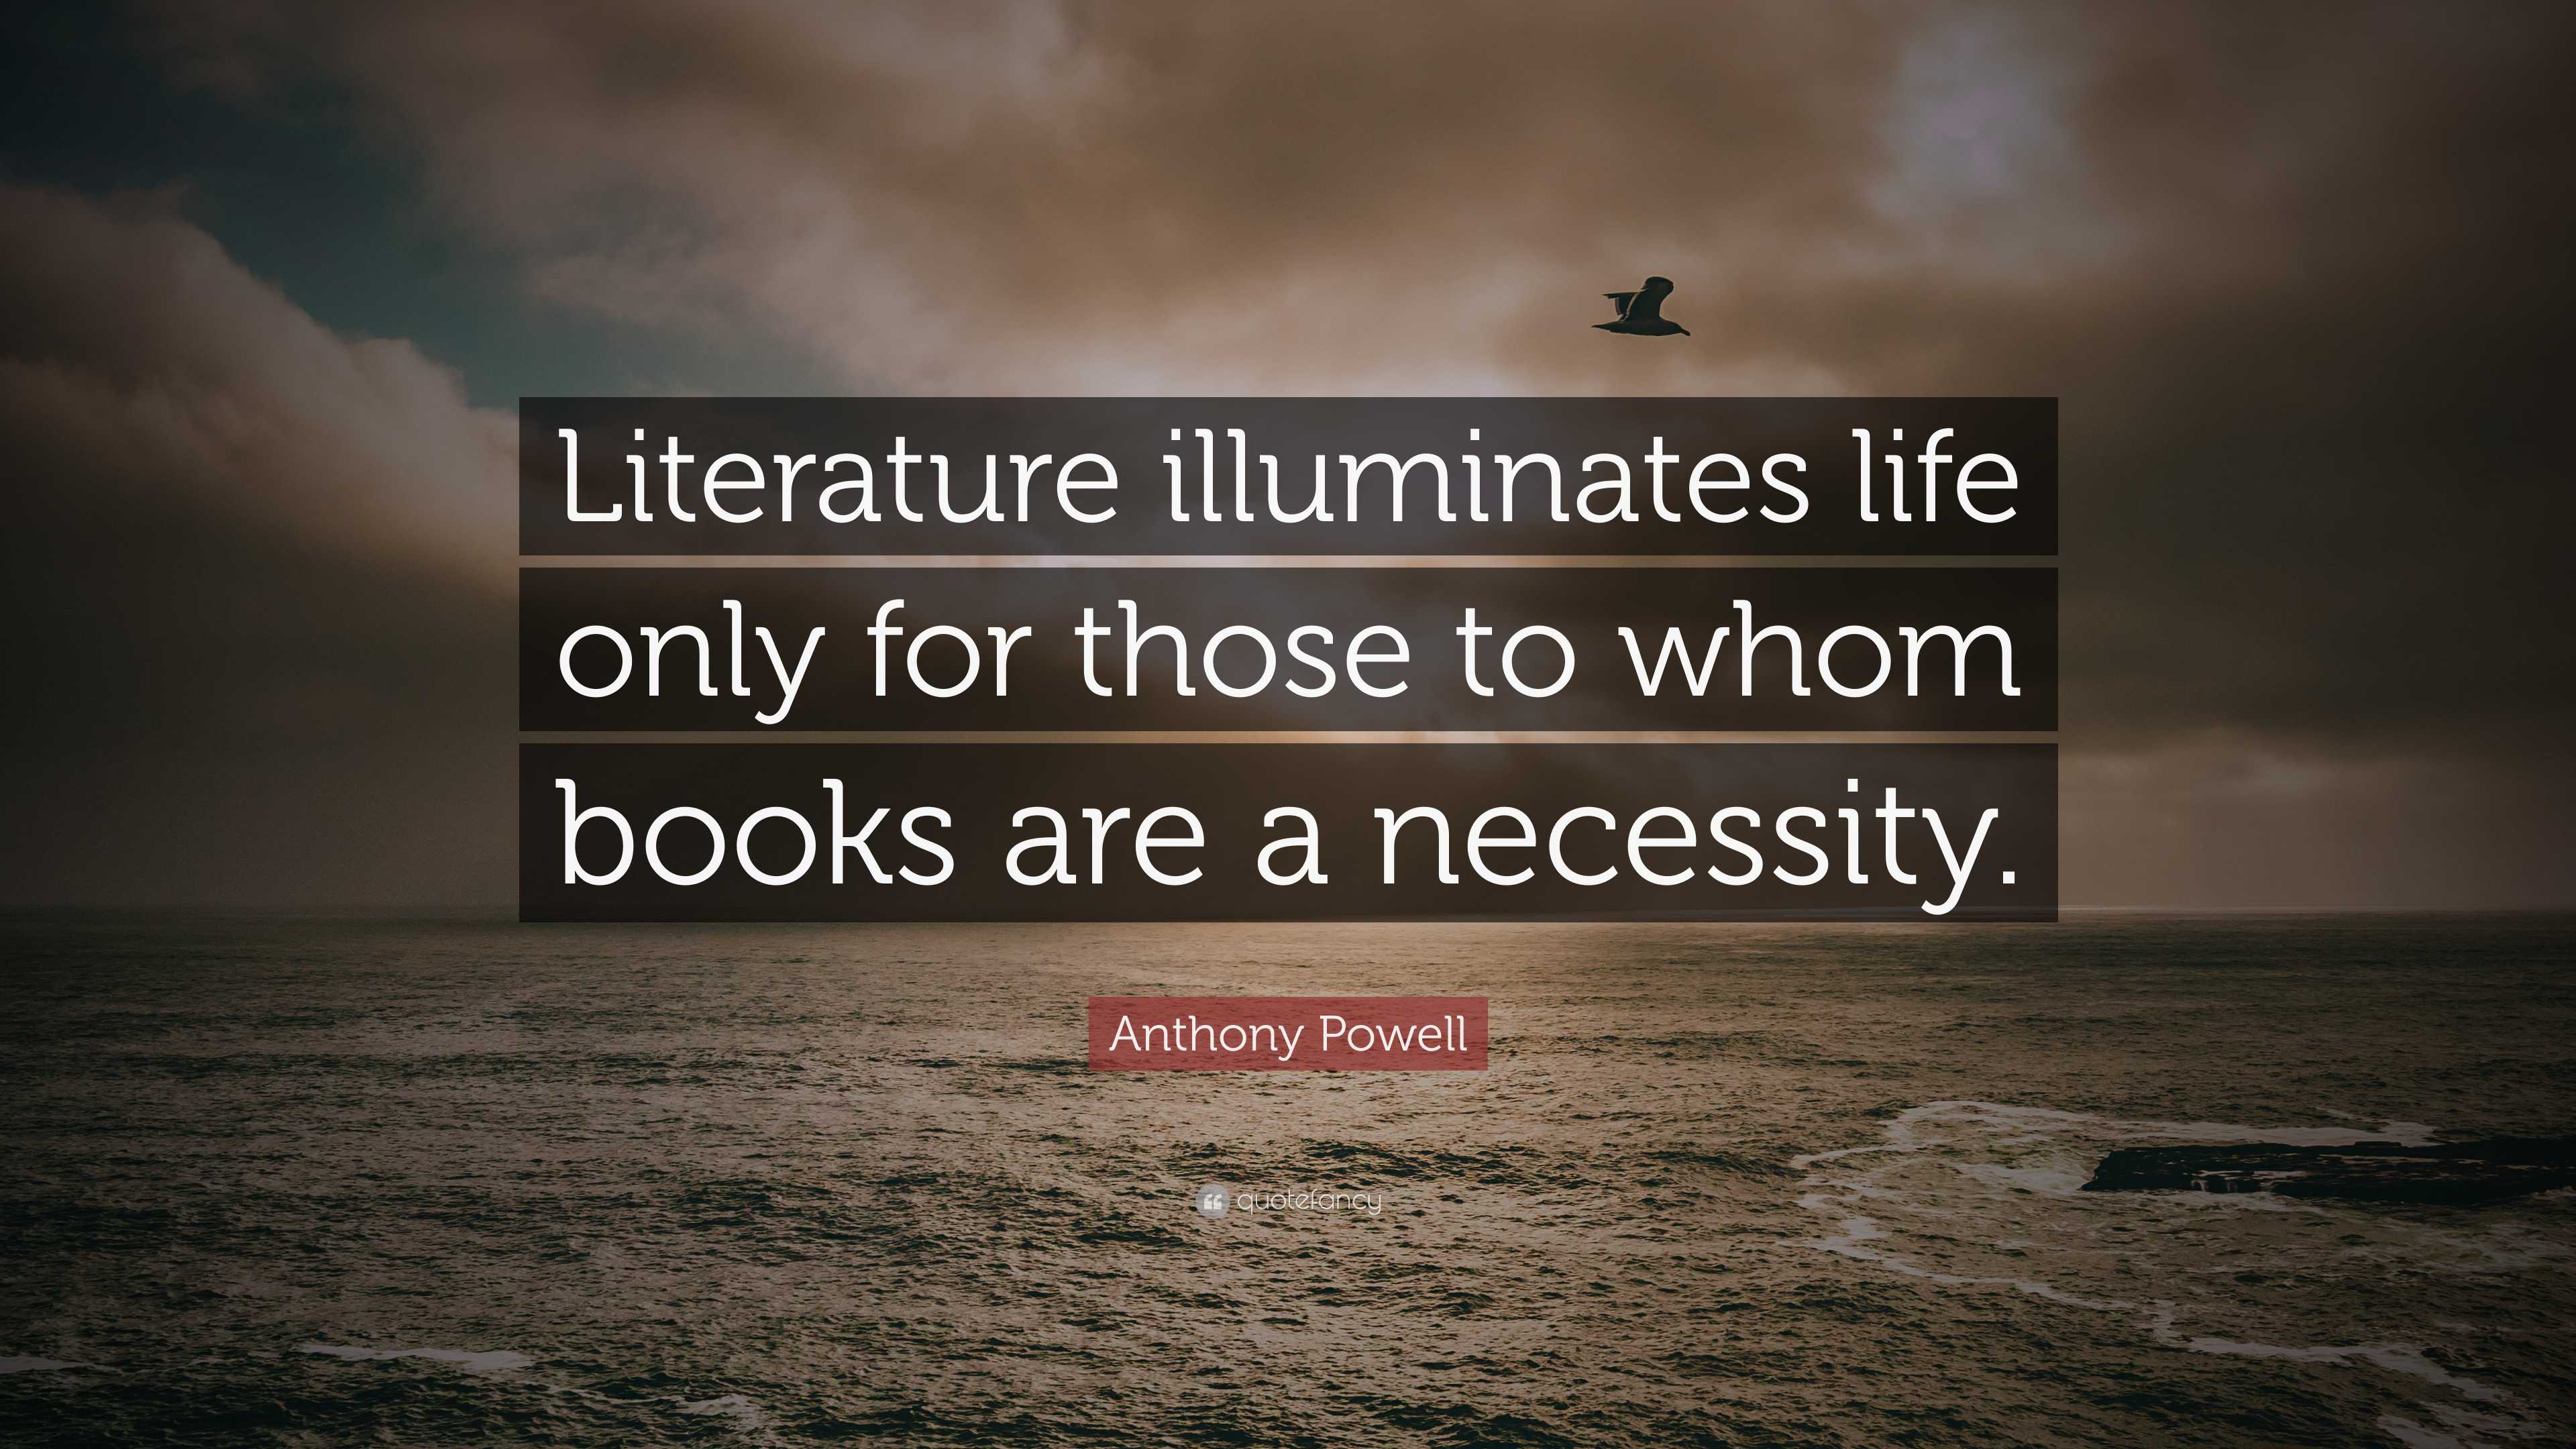 Anthony Powell Quote: “Literature illuminates life only for those to ...